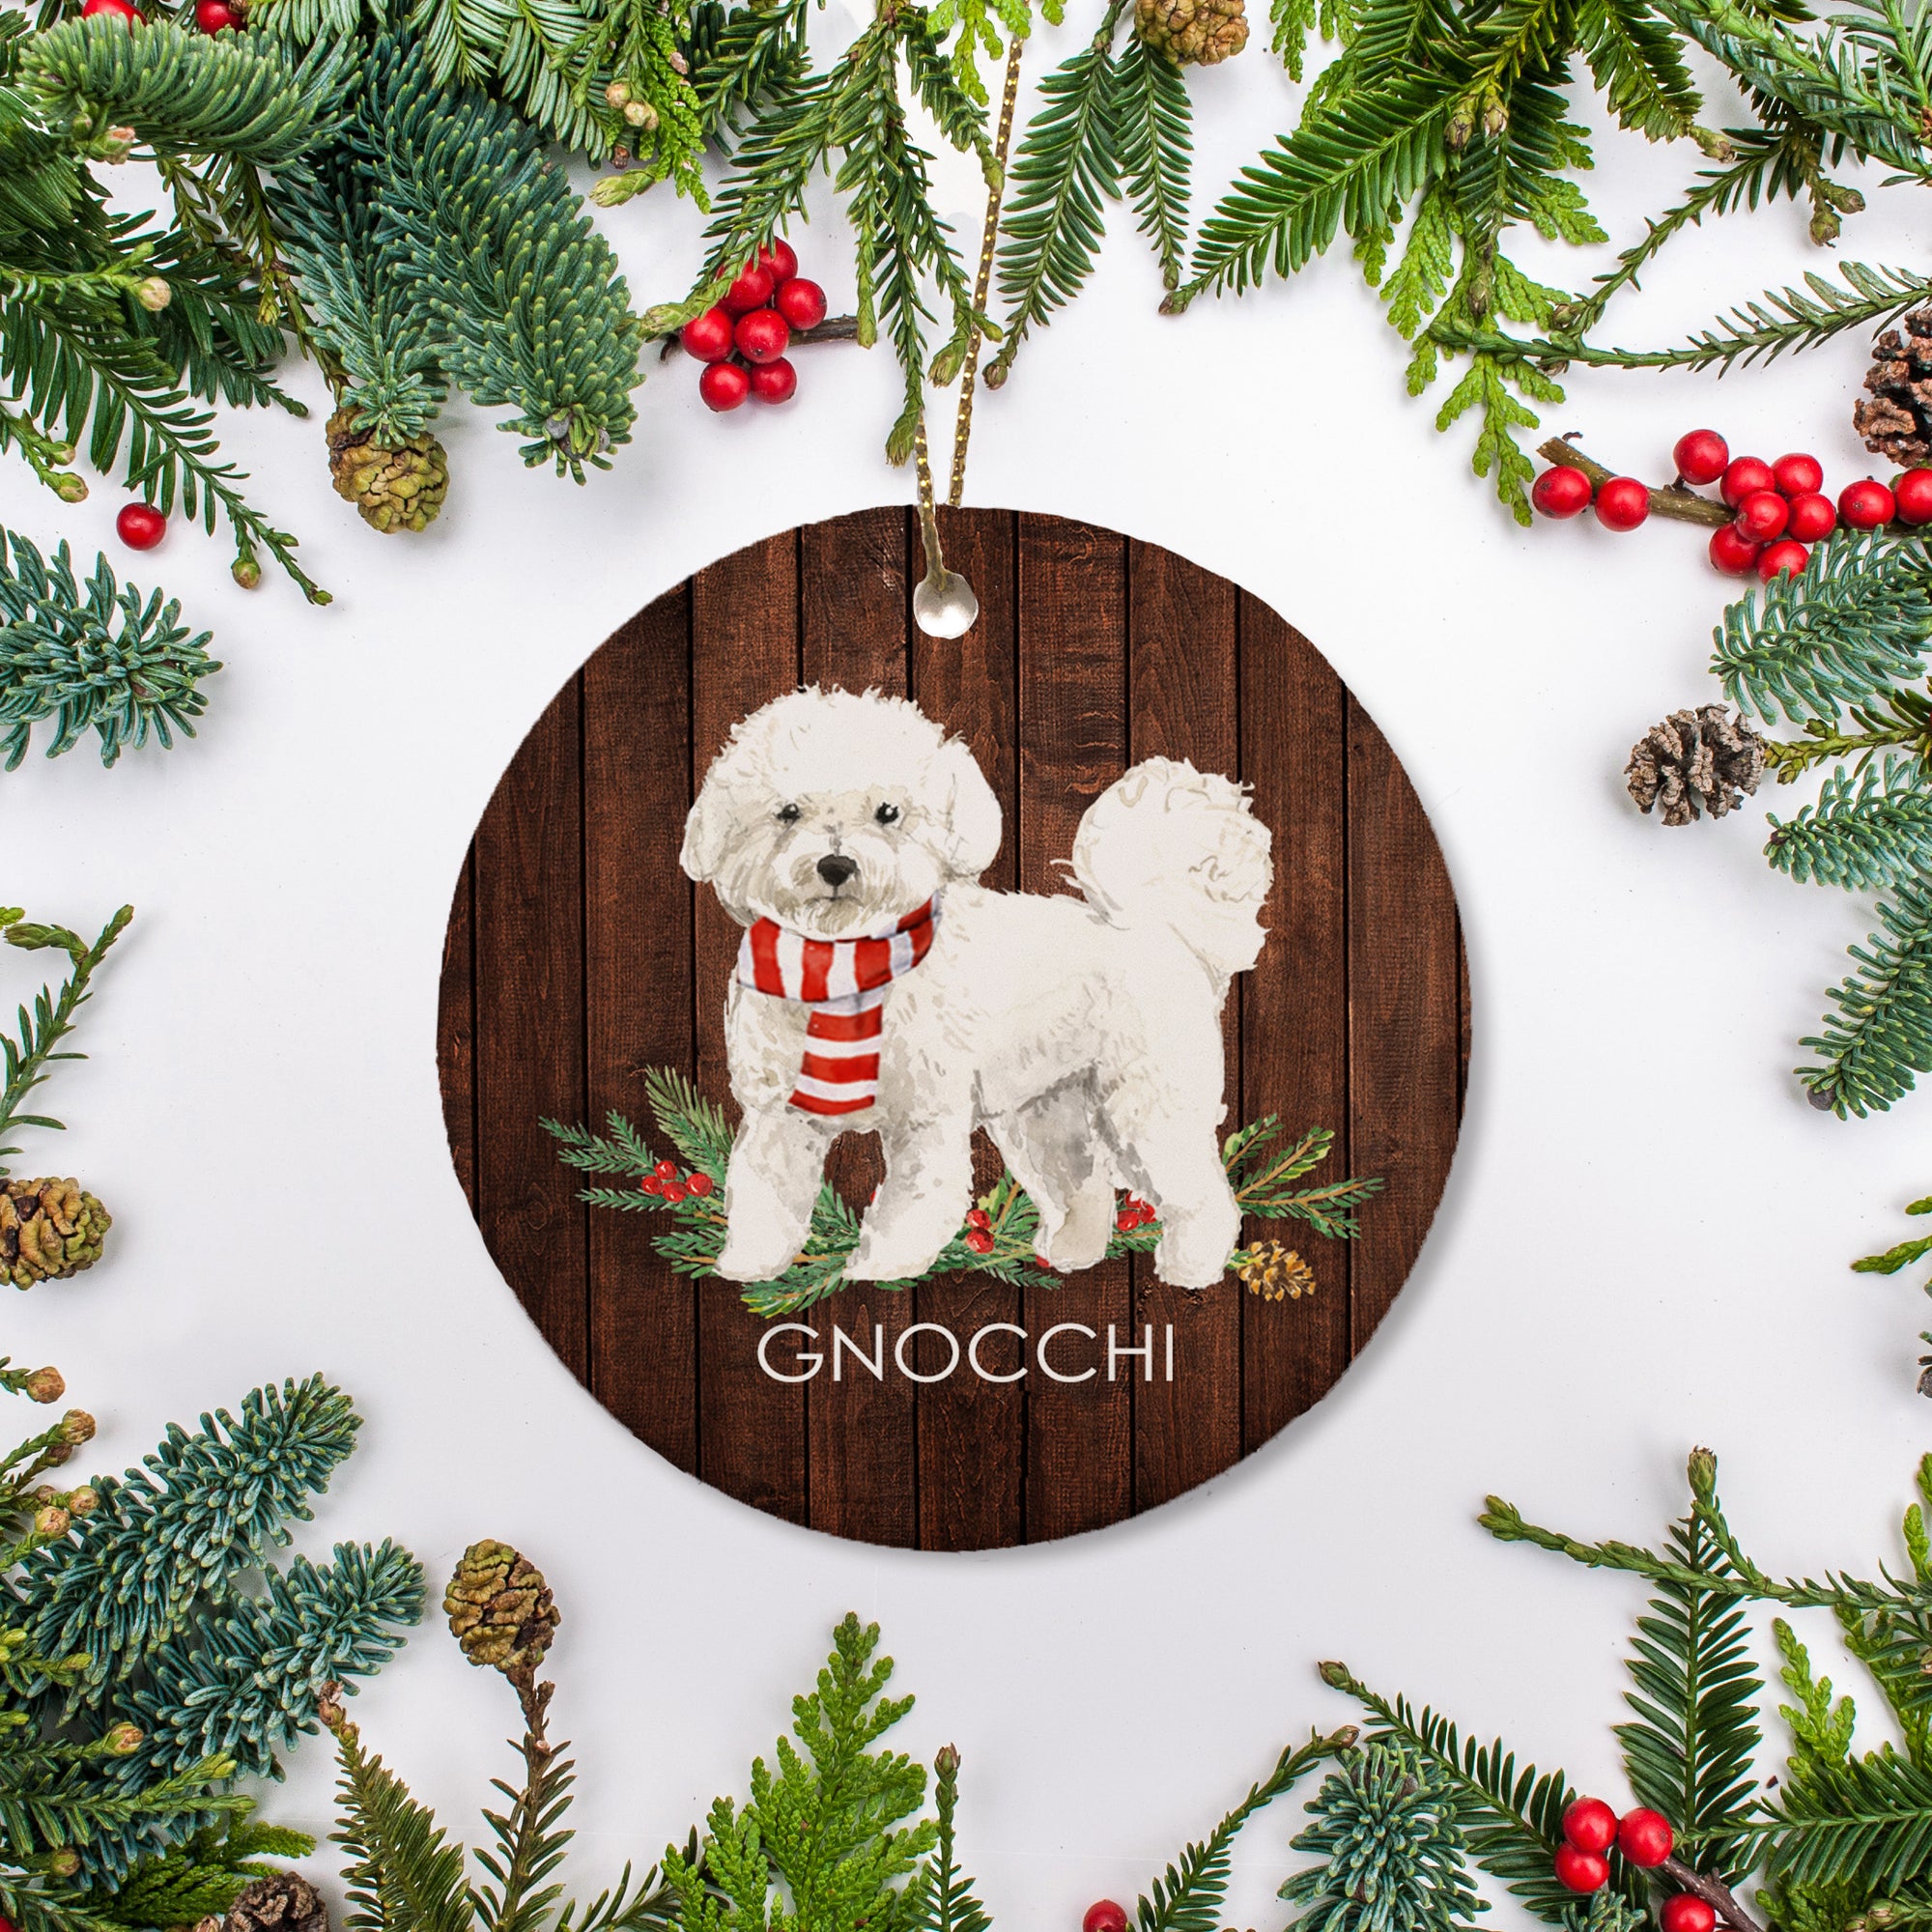 This personalized Christmas ornament features a Bichon Frise, personalized with your dog's name. It is a lovely gift for any pet lover or way to commemorate your fur baby's first Christmas.